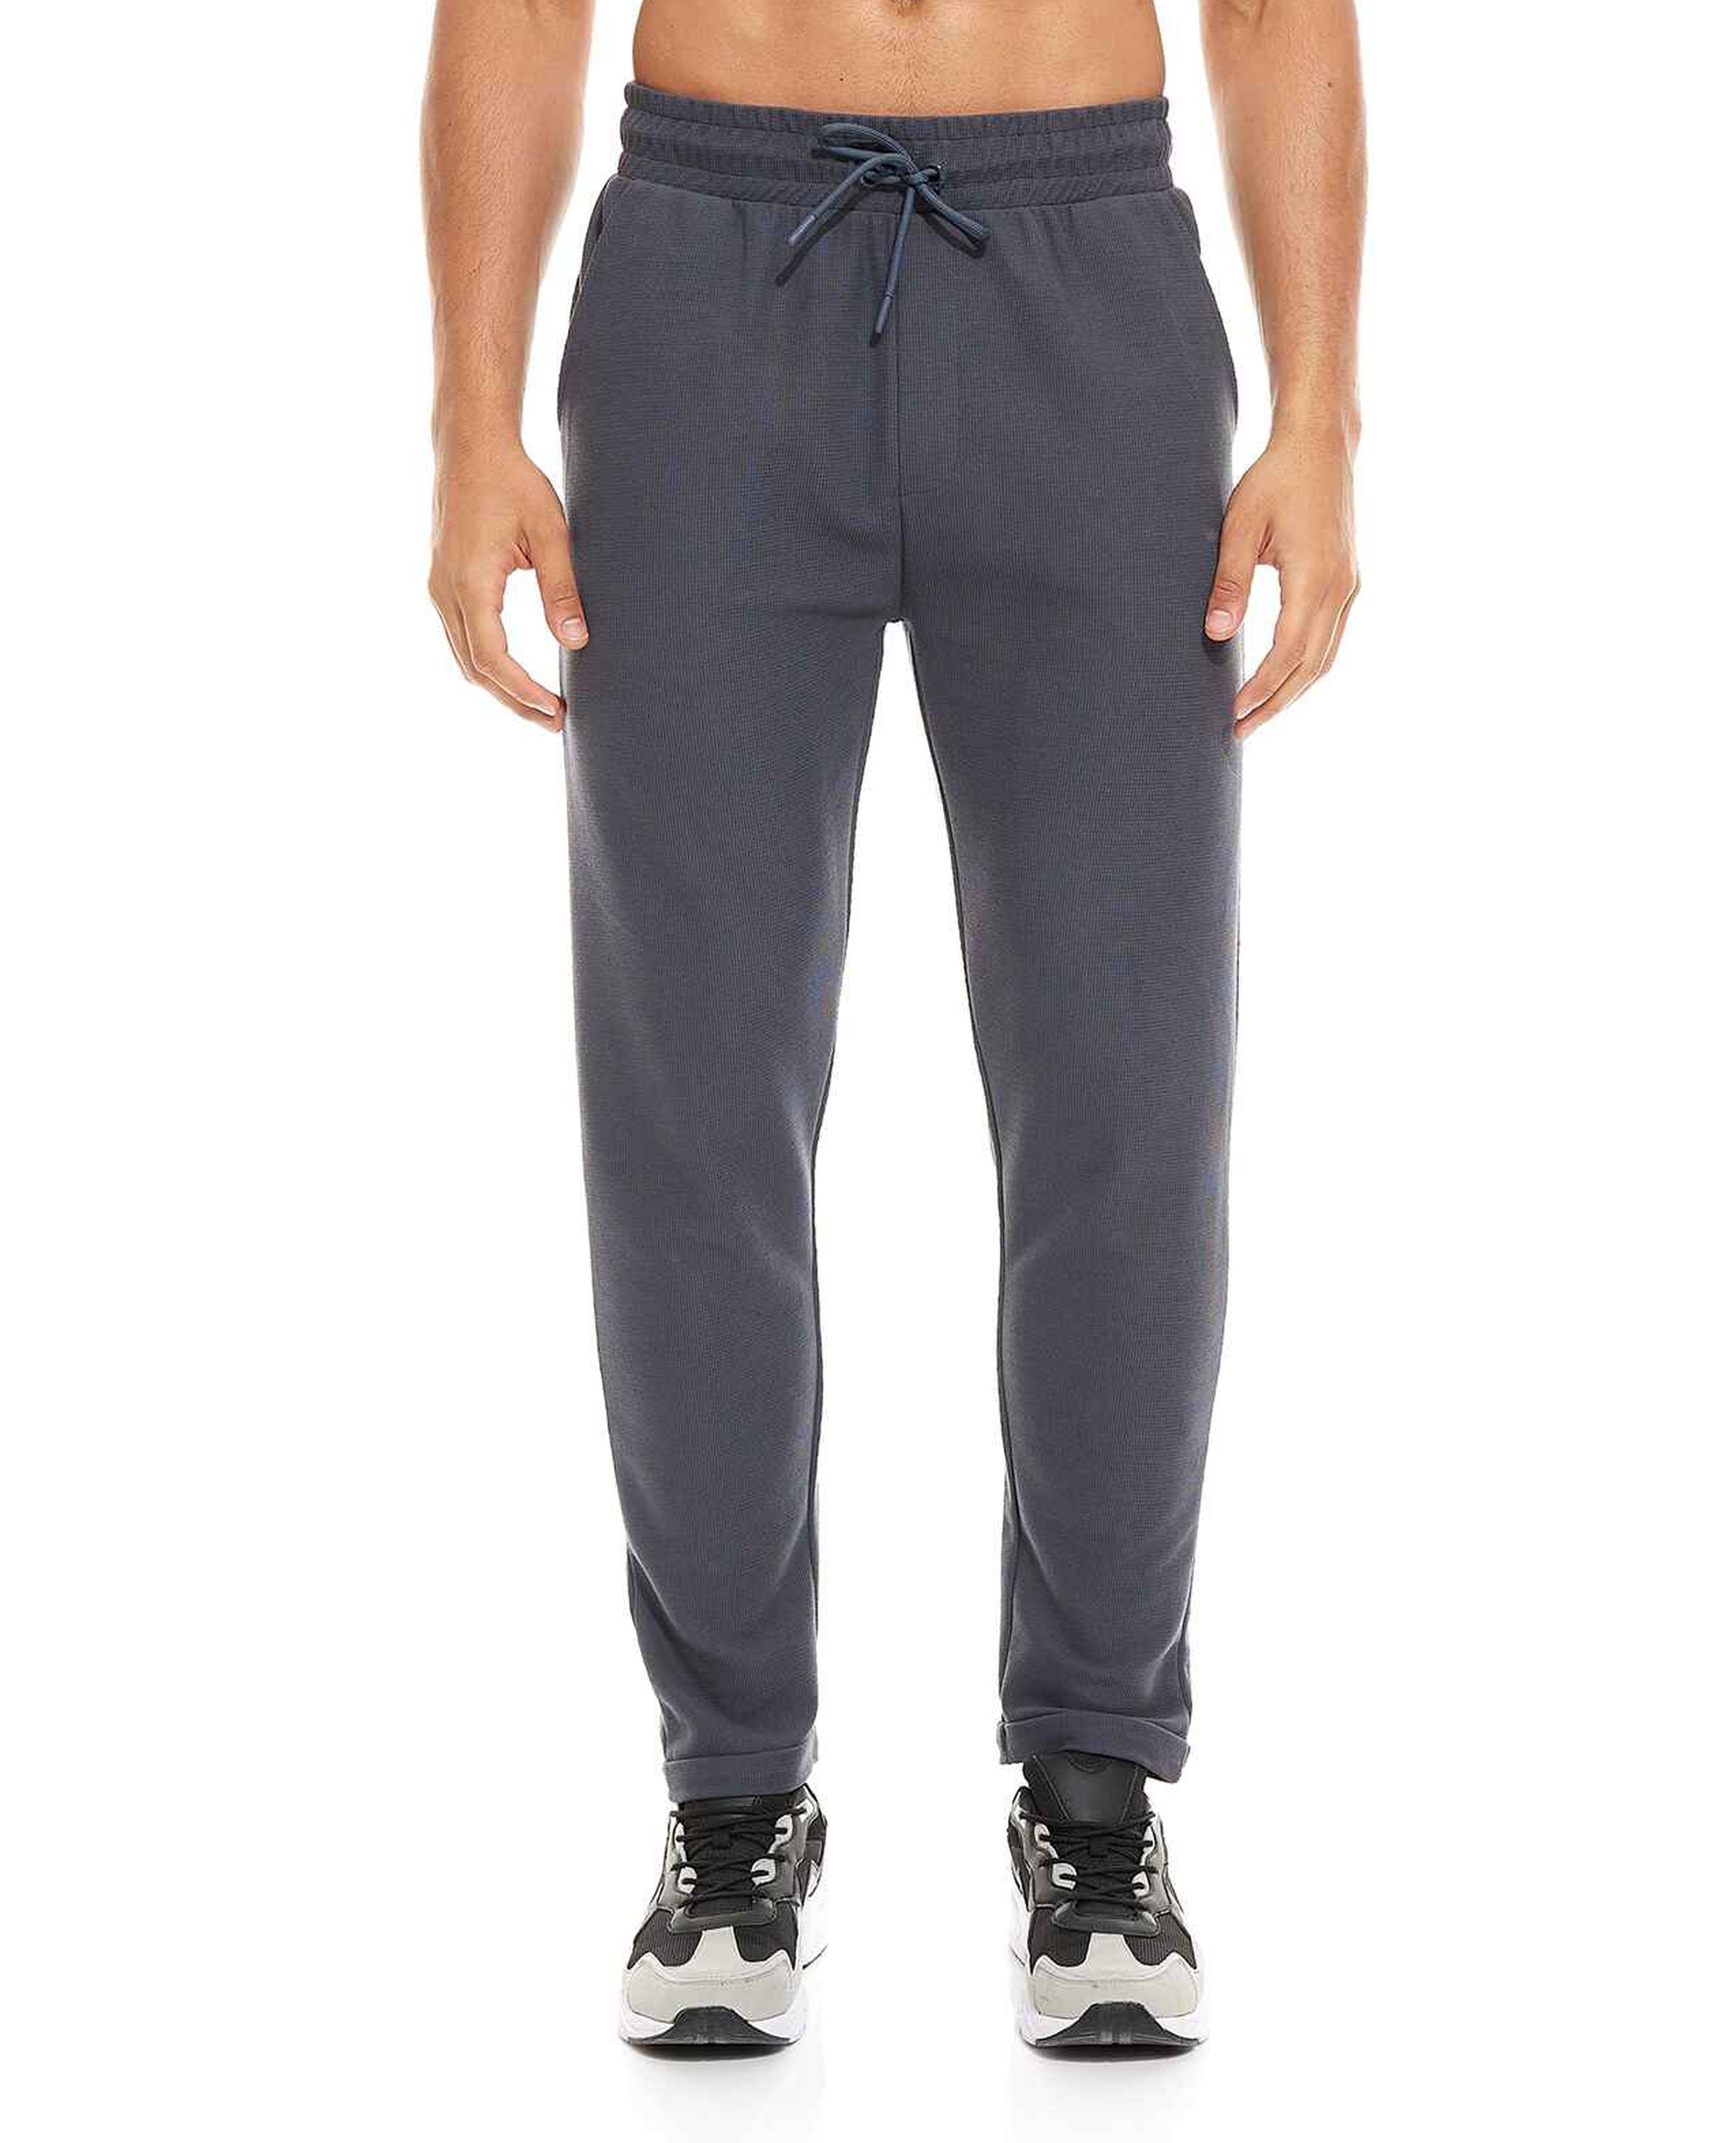 Shop Men's Gym Pants and Joggers, UAE Online Shopping For Sportswear & Gym  Training Accessories